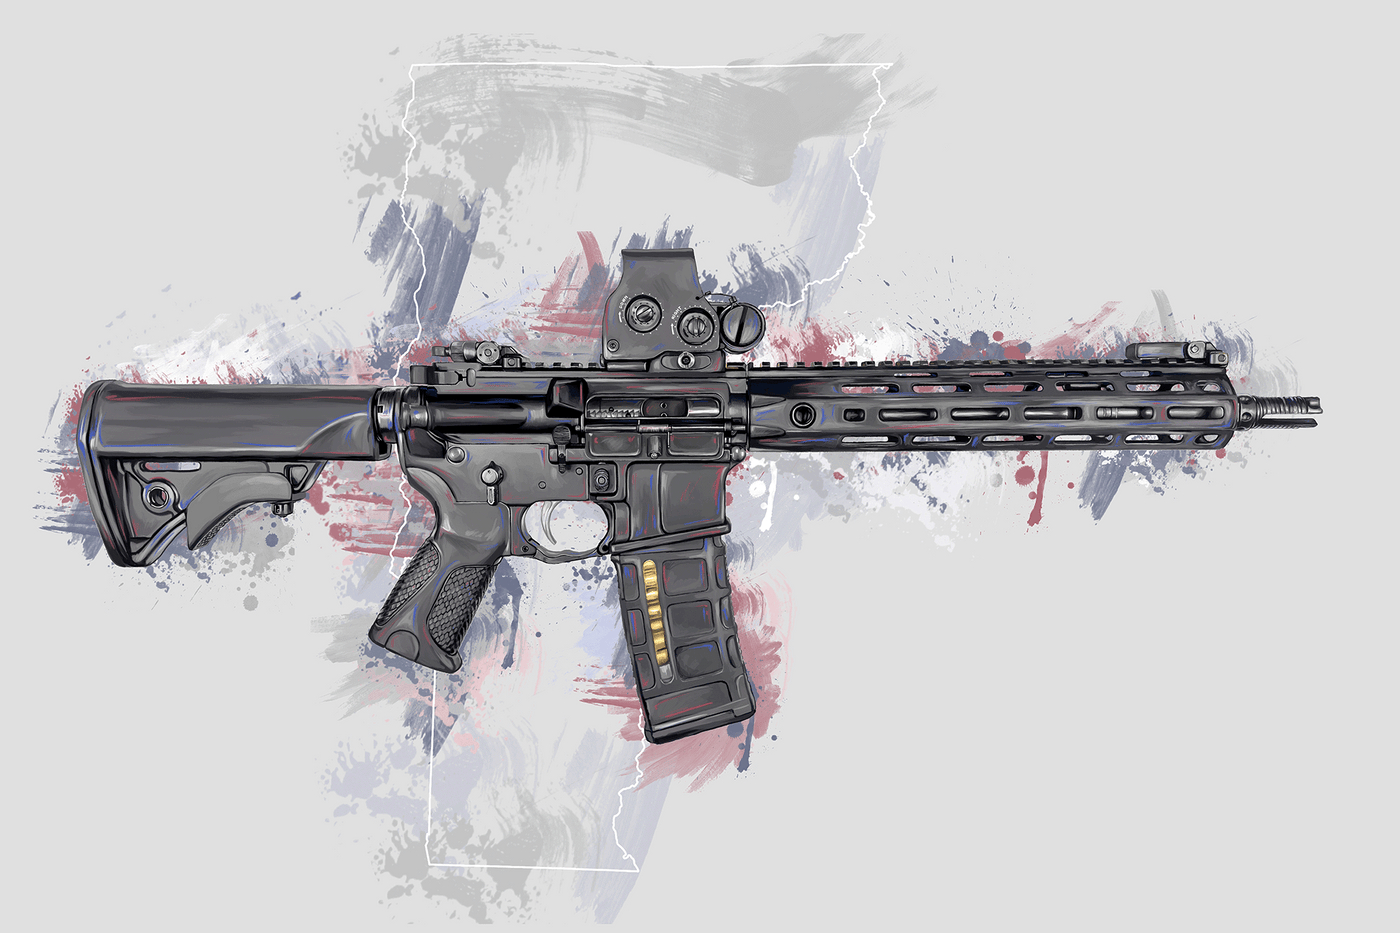 Defending Freedom - Vermont - AR-15 State Painting